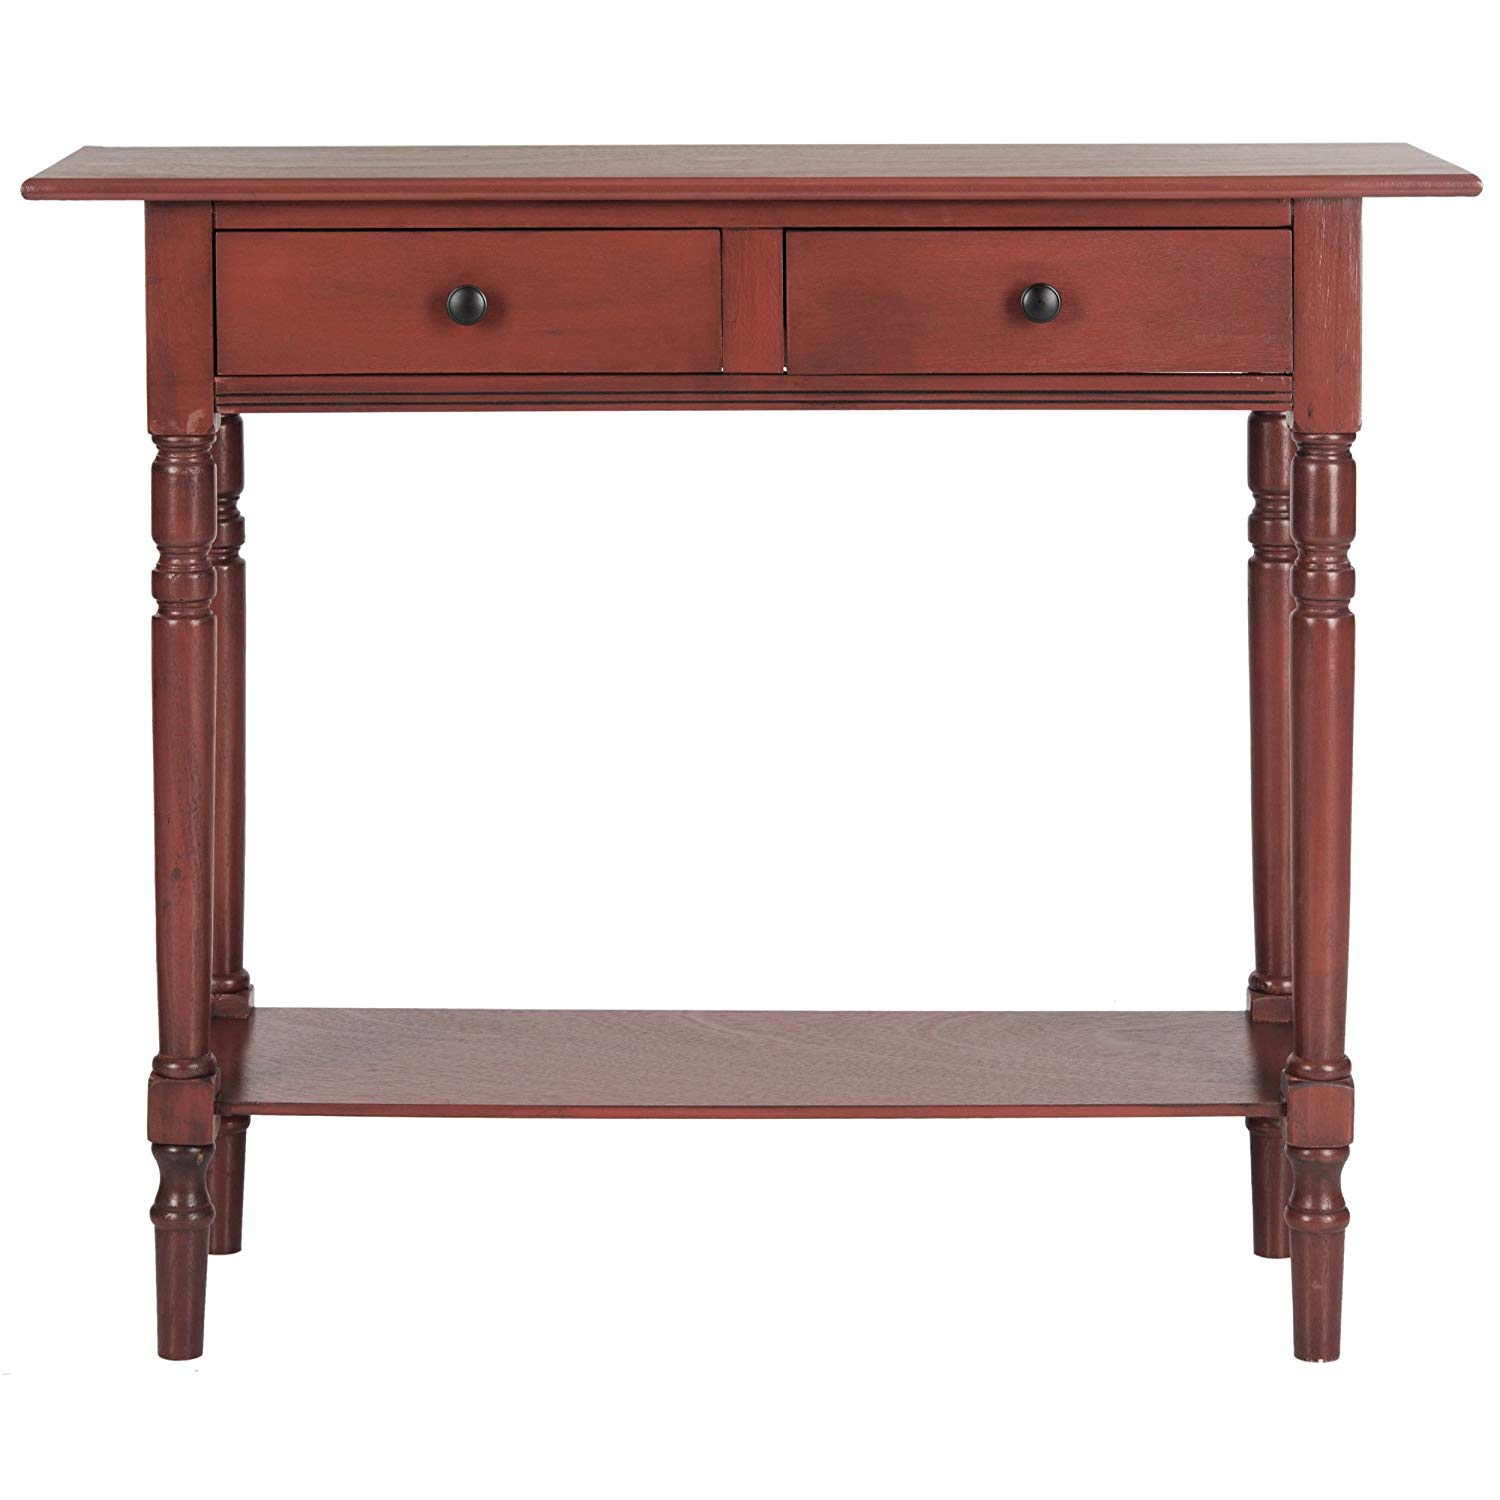 farmhouse sofa table probably outrageous best the neptune safavieh american homes collection rosemary red console one drawer end kitchen dining white legs large round seats tall